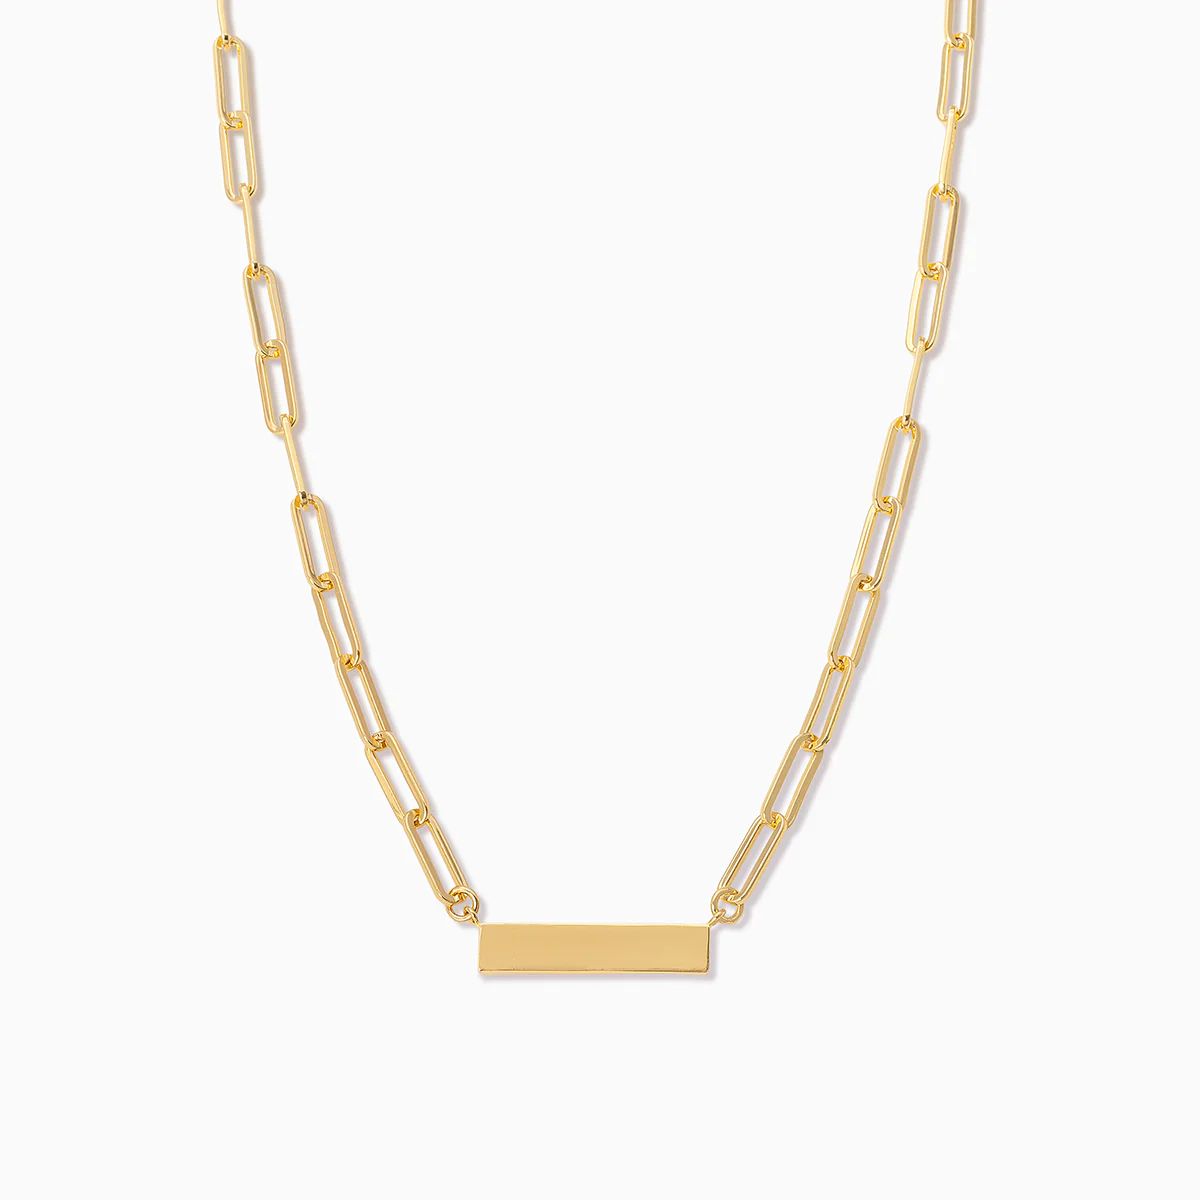 Chain and Bar Necklace | Uncommon James